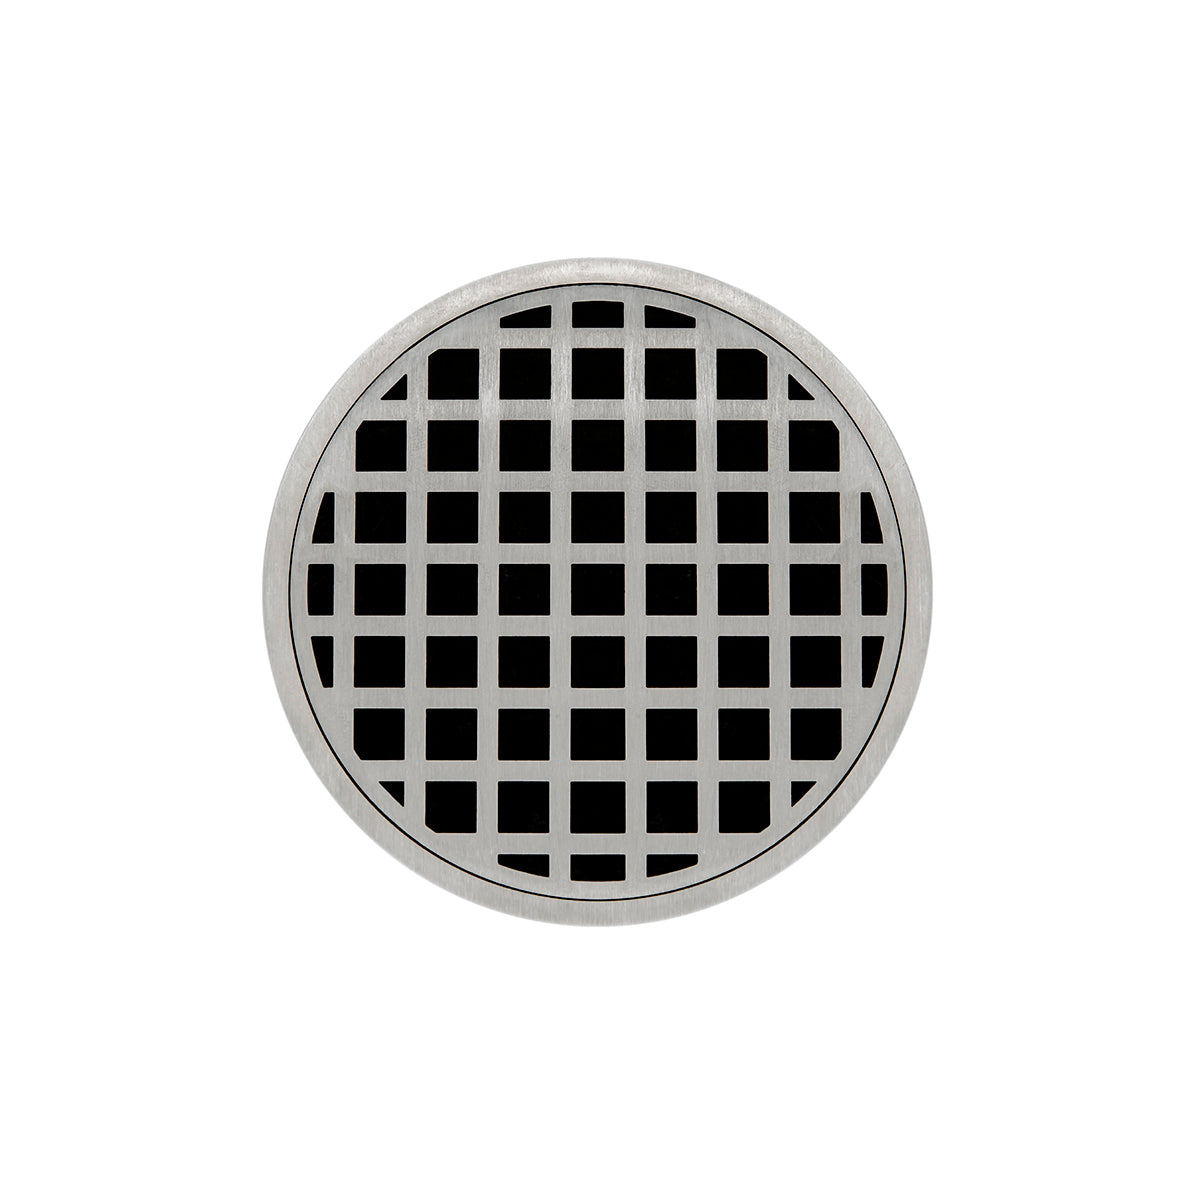 Infinity Drain 5" Round RQD 5 Premium Center Drain Kit with Squares Pattern Decorative Plate with Cast Iron Drain Body, 2" Outlet